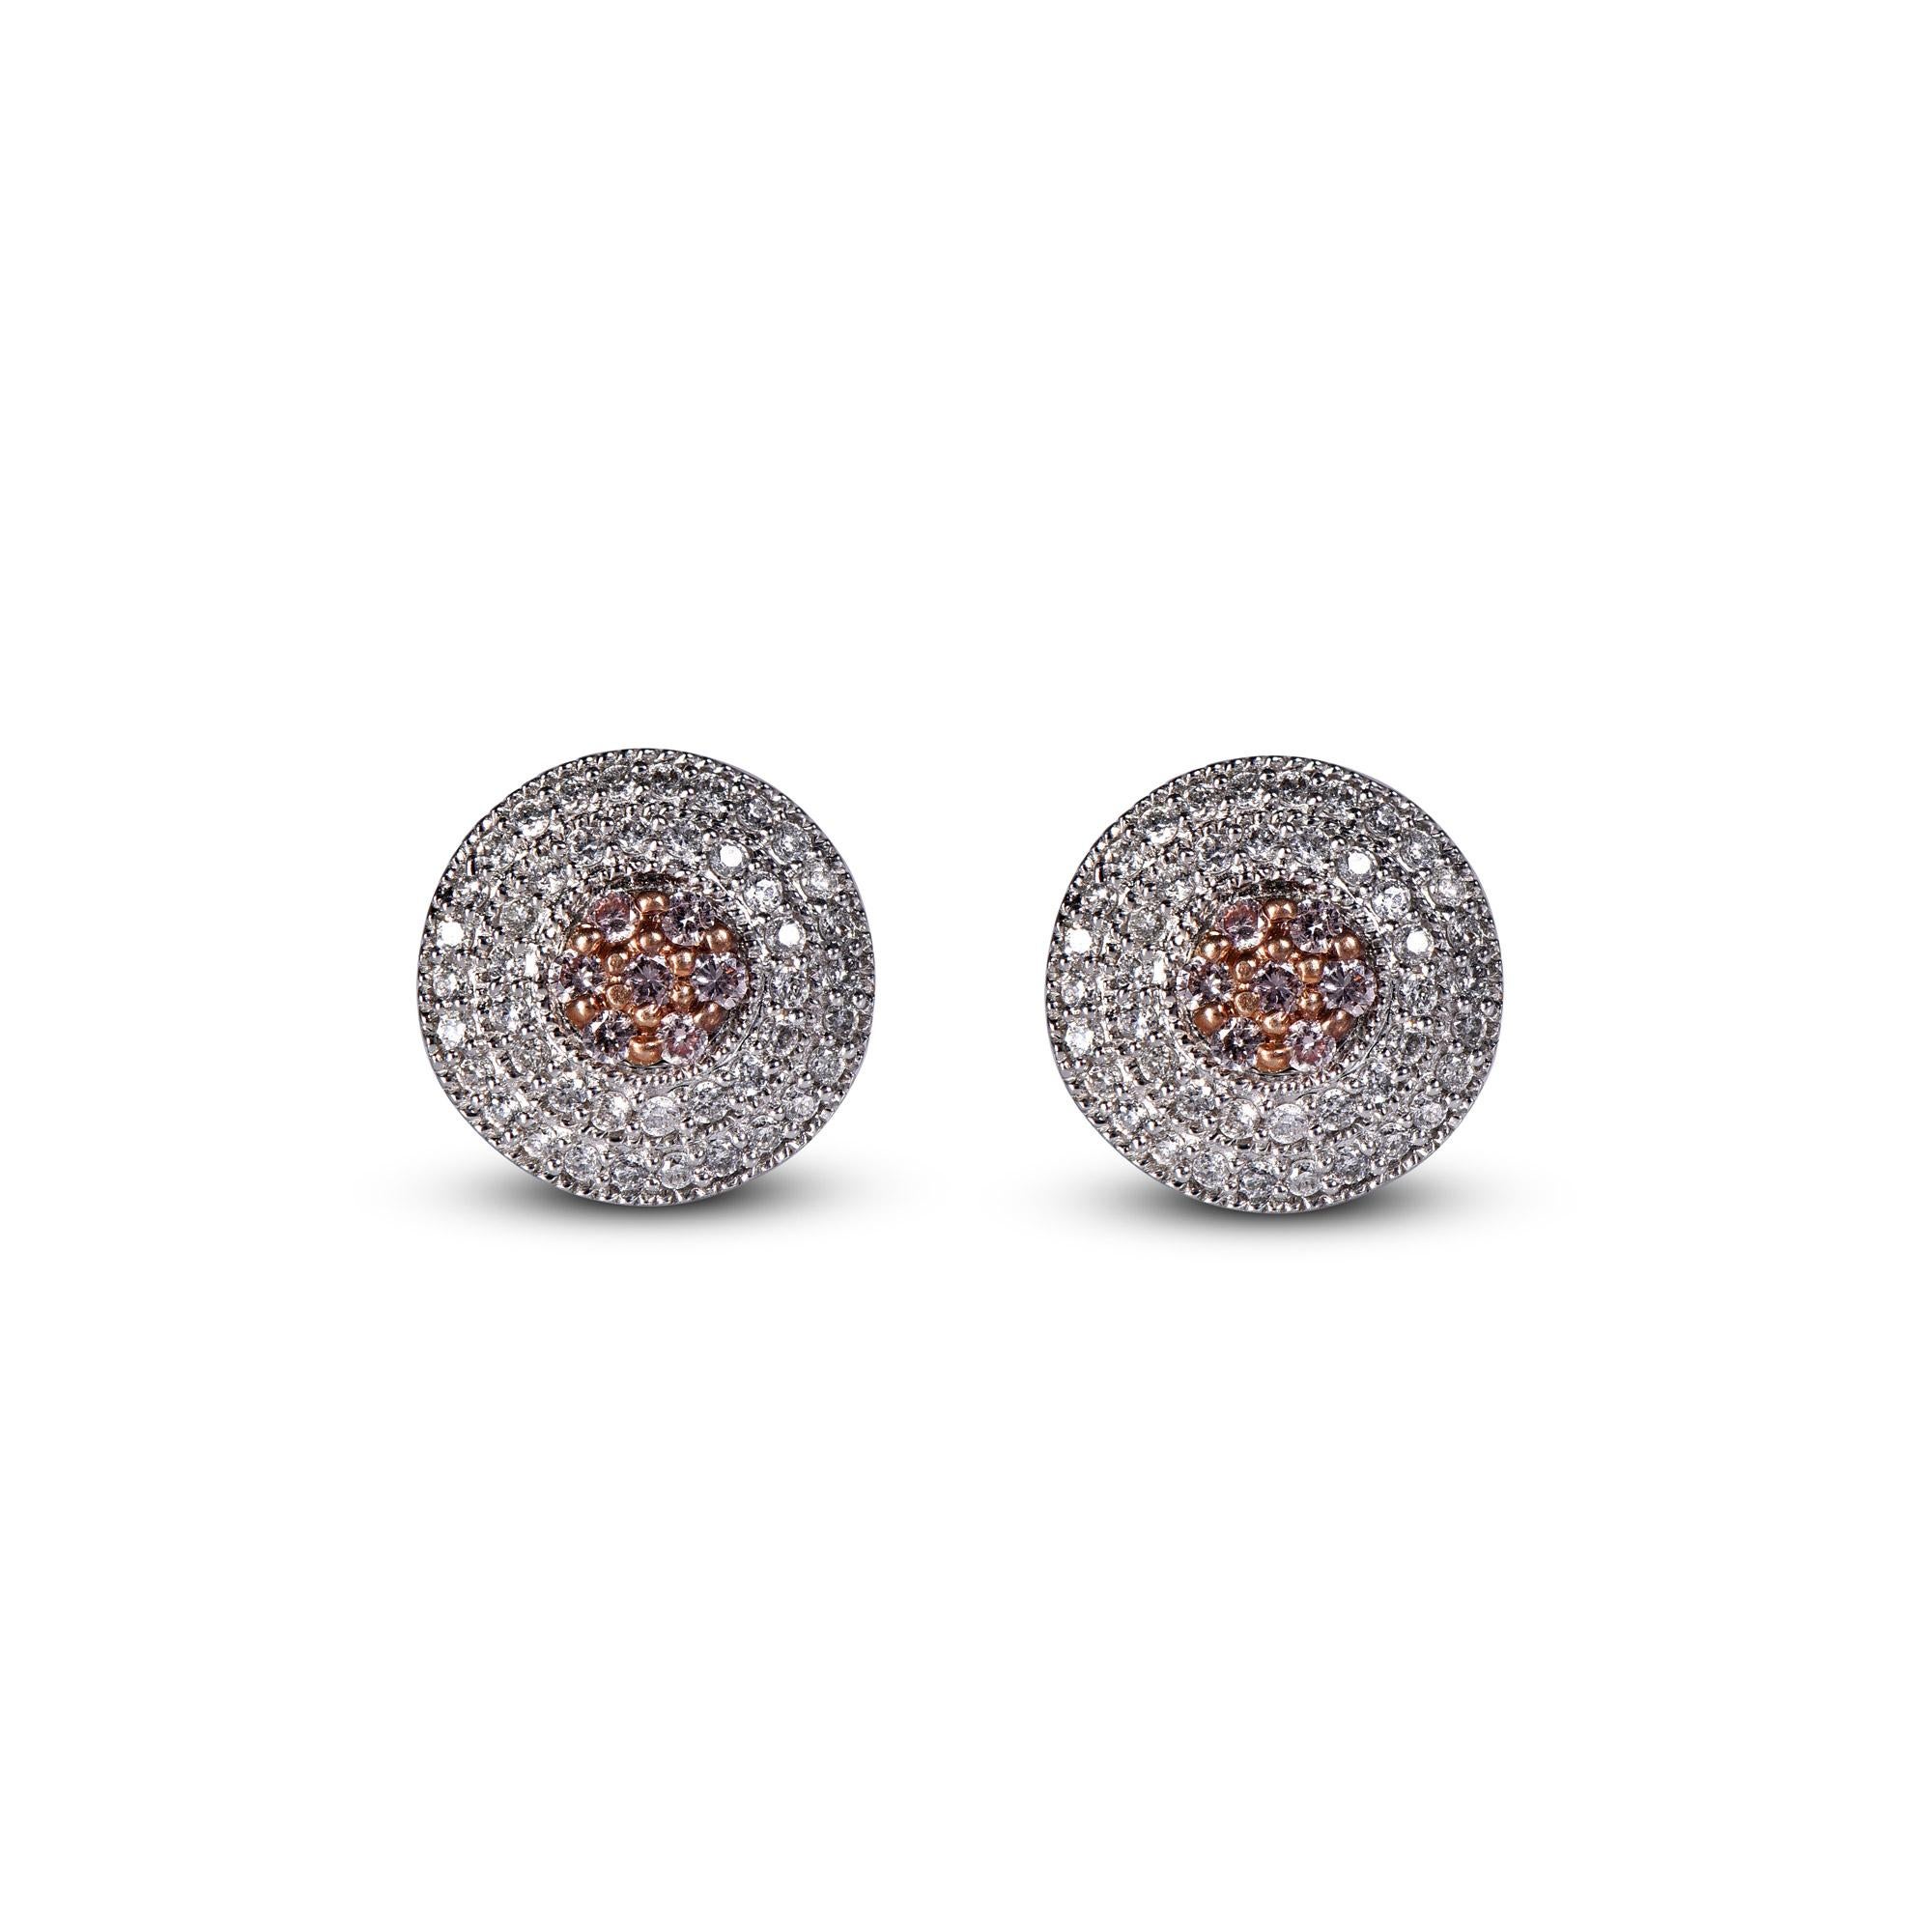 Expertly crafted in 18K solid white gold, this double diamond frame stud earring is cleverly filled with 88 round white and 14 pink diamond set in prong setting, H-I color I1 clarity. Captivating with 0.50 carats diamonds and a bright polished